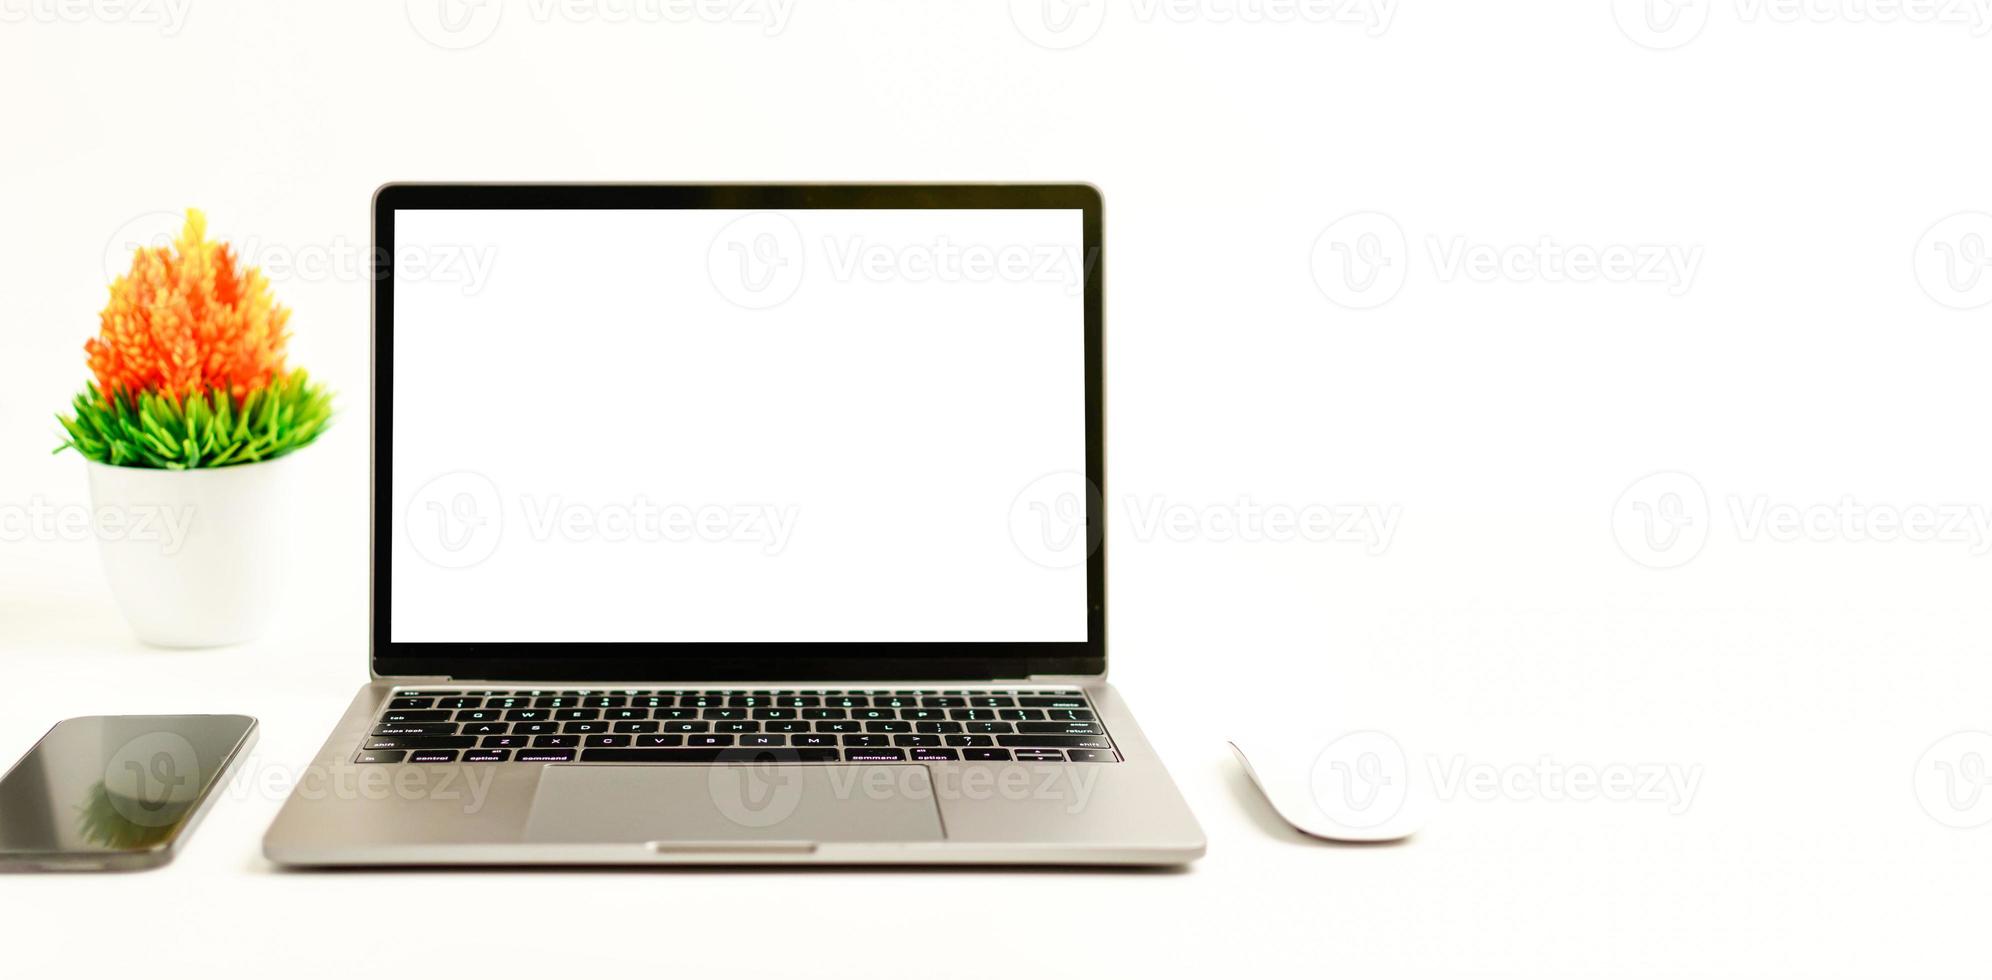 Blank white screen laptop on a white table in the office. Working concept using technology smartphones, notebook, internet. Copy space on right for design or text, Closeup, Gray, and blur background photo